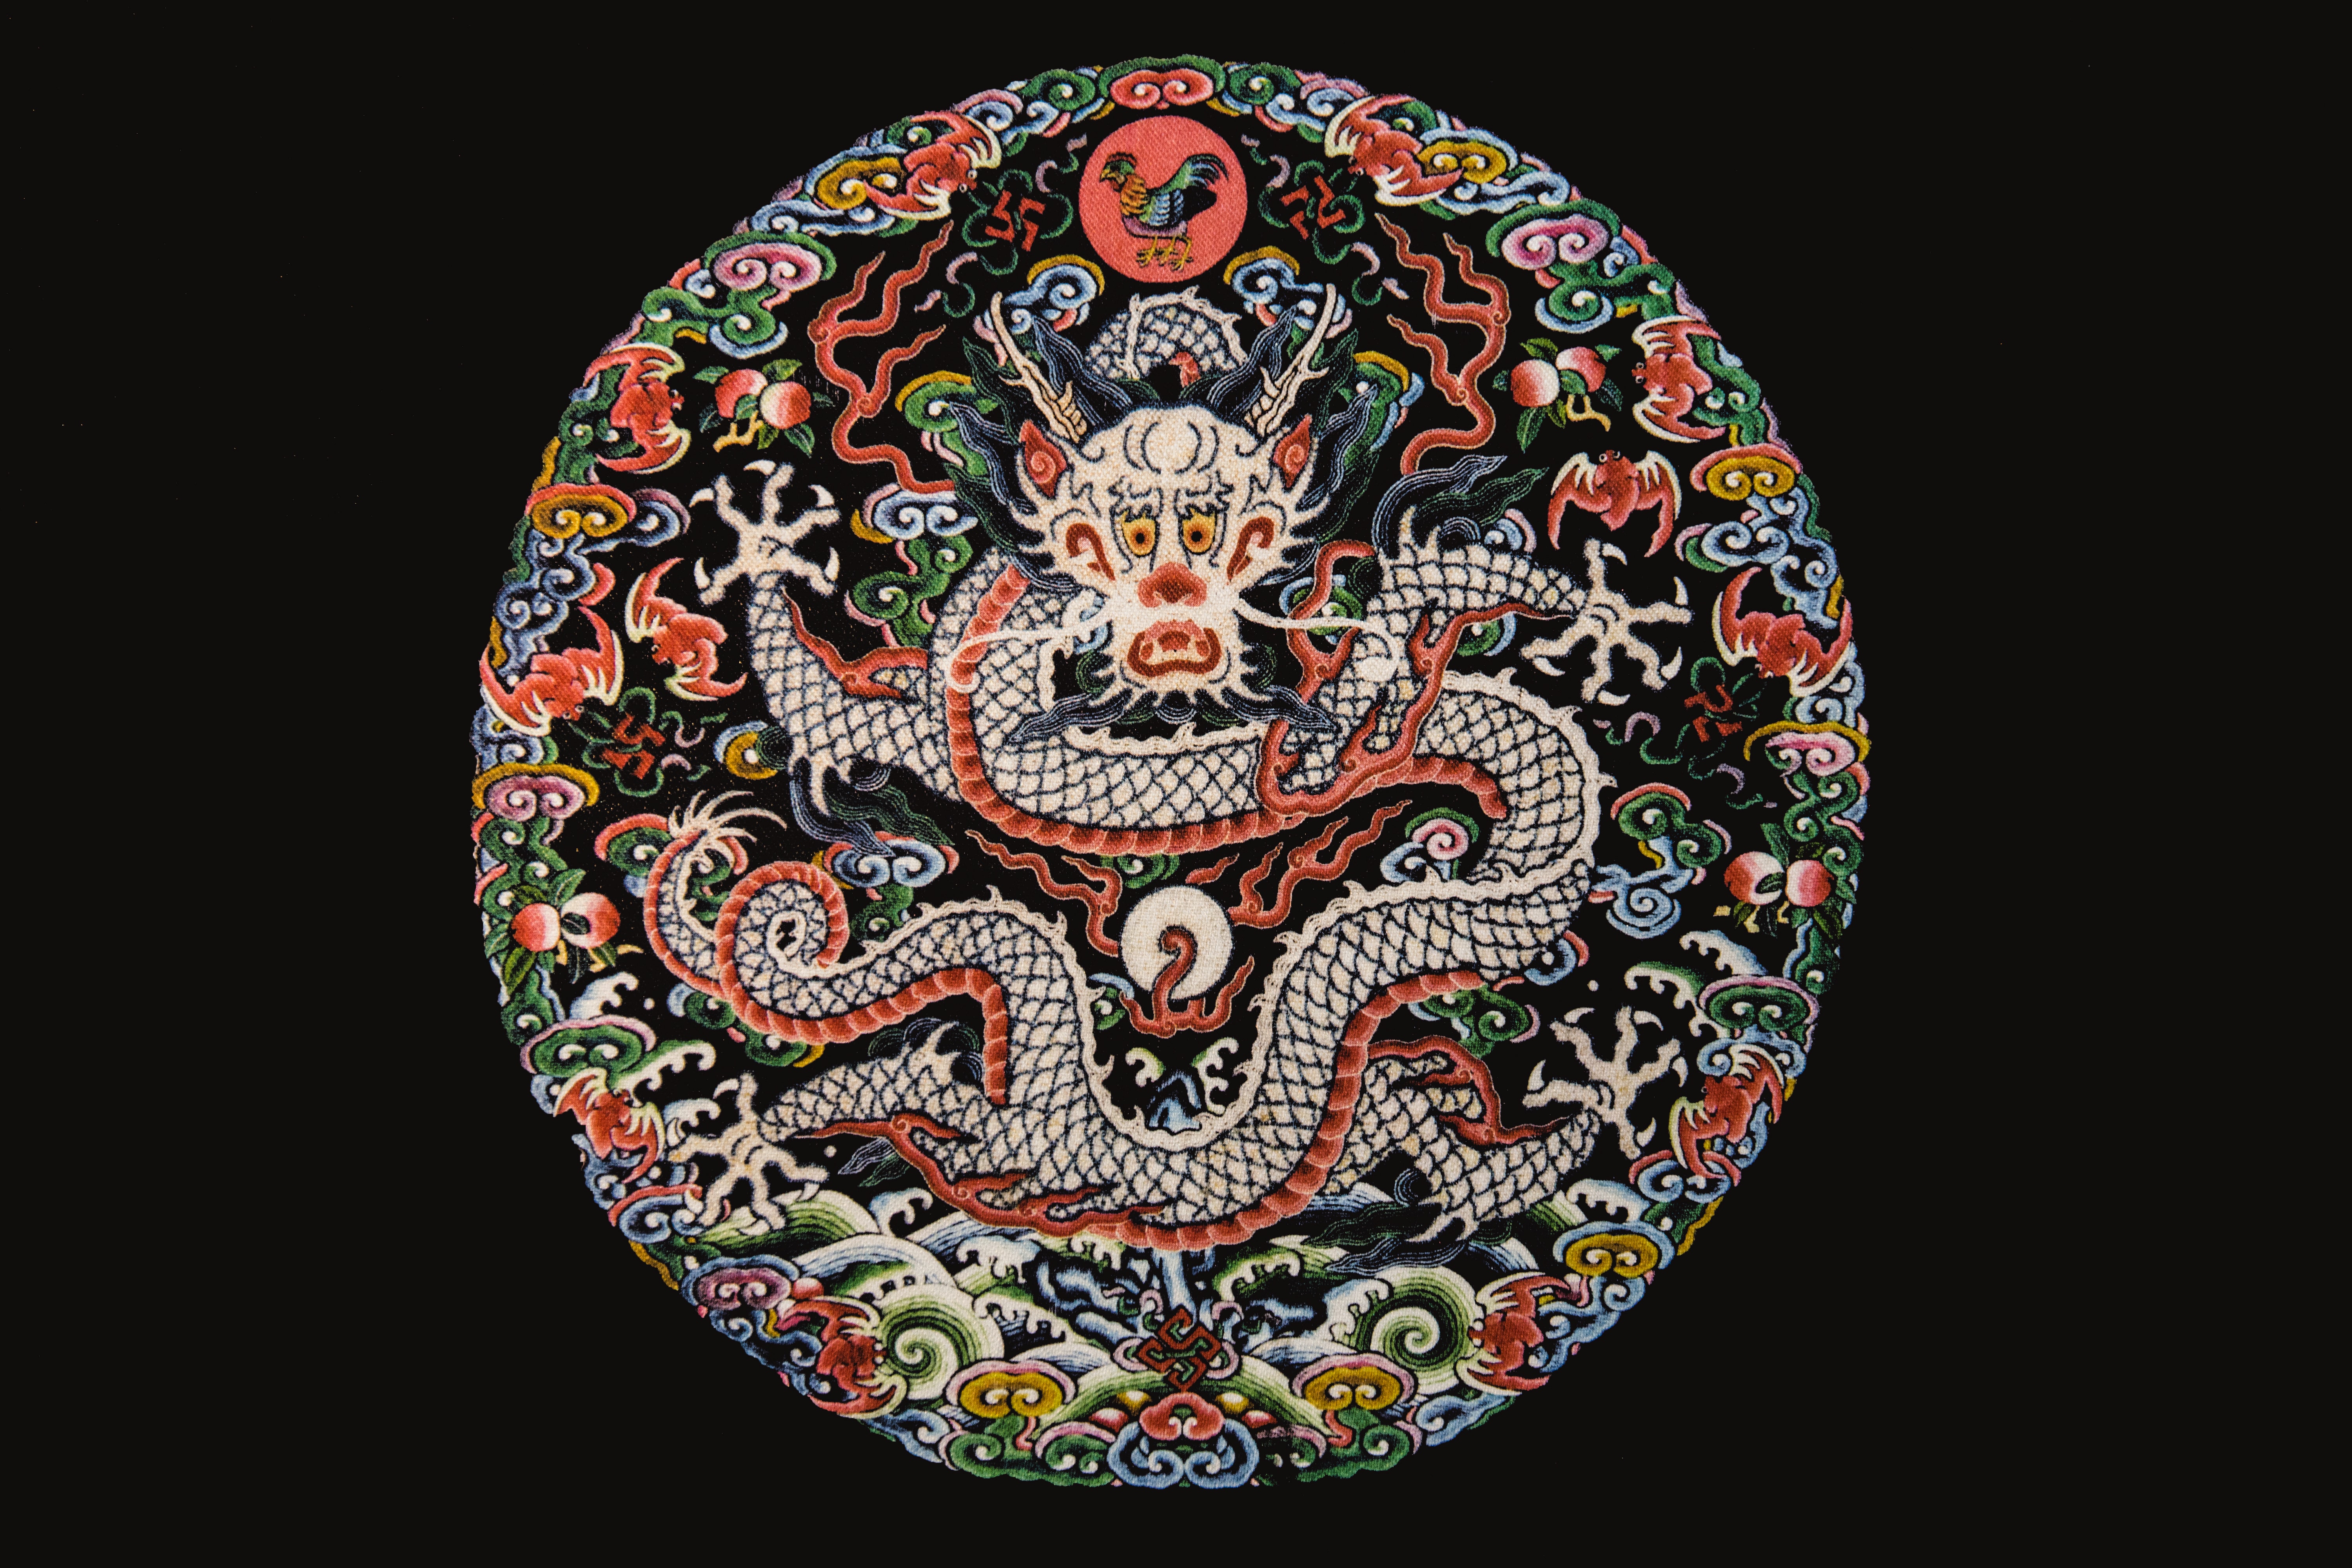 Chinese Cloisonné